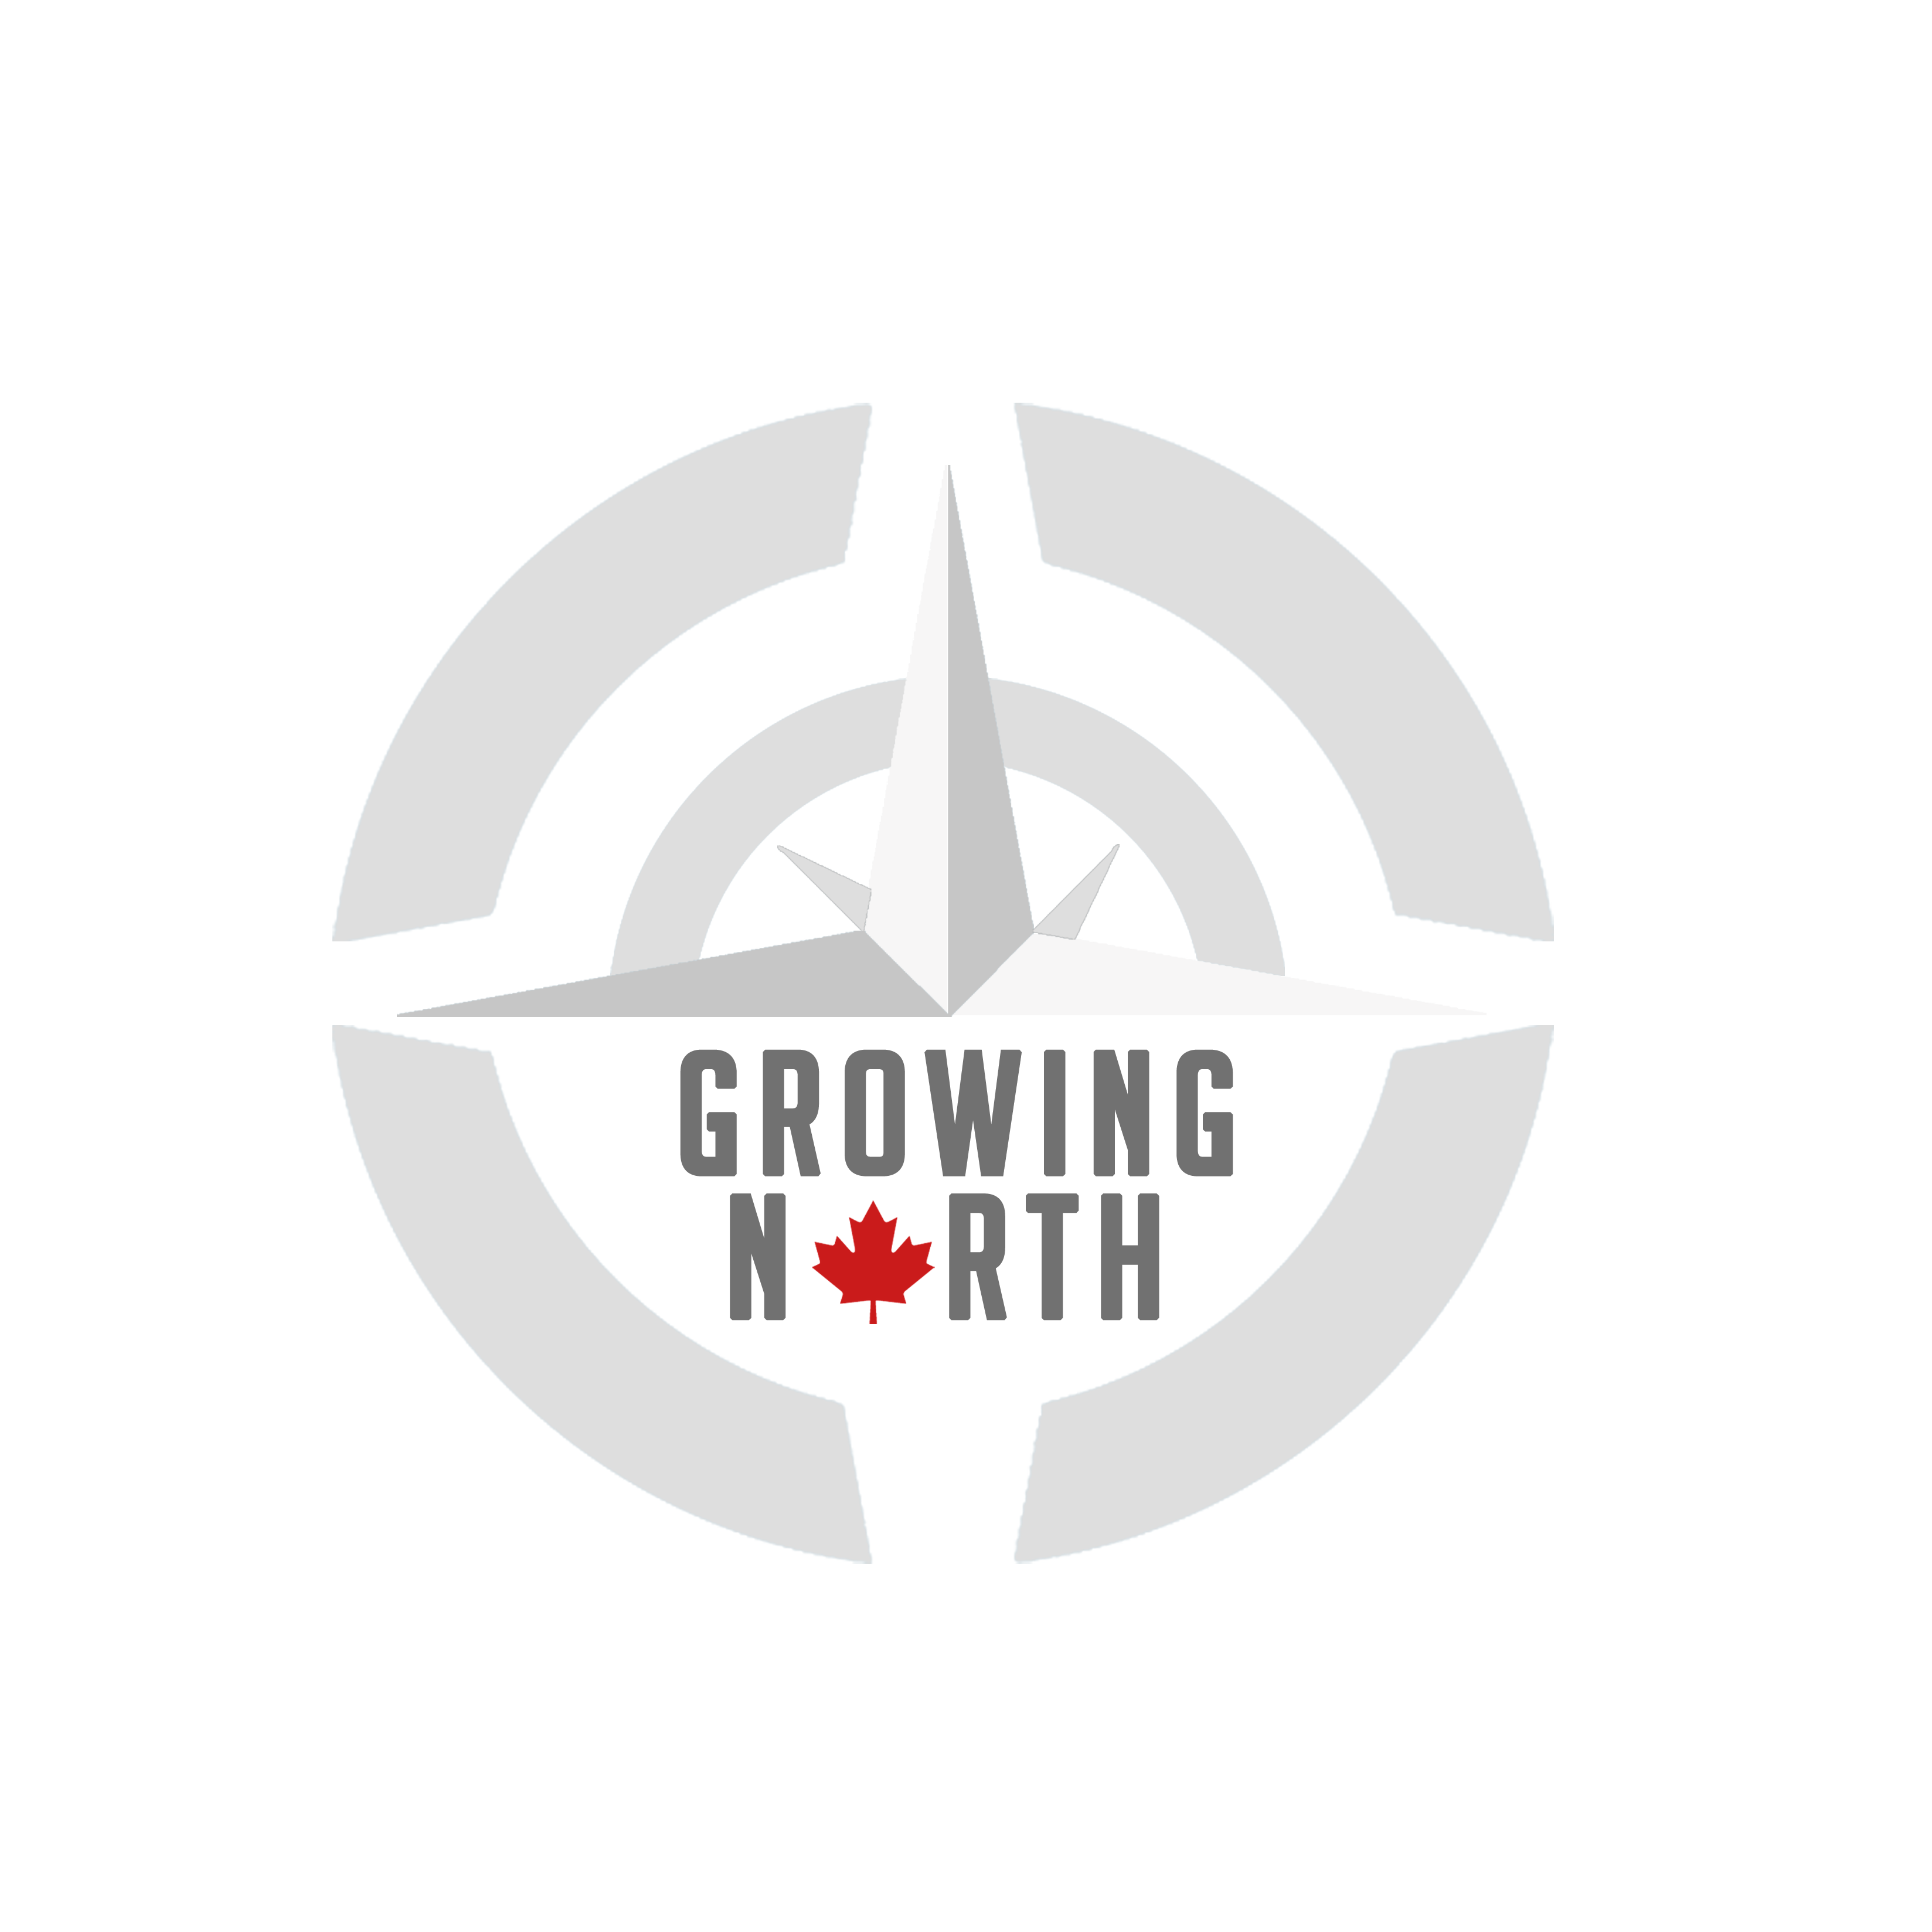 This logo for "Growing Norht" has the company name in dark grey within 2 rings of light grey circles. The "N" in North is replaced by a red maple leaf.